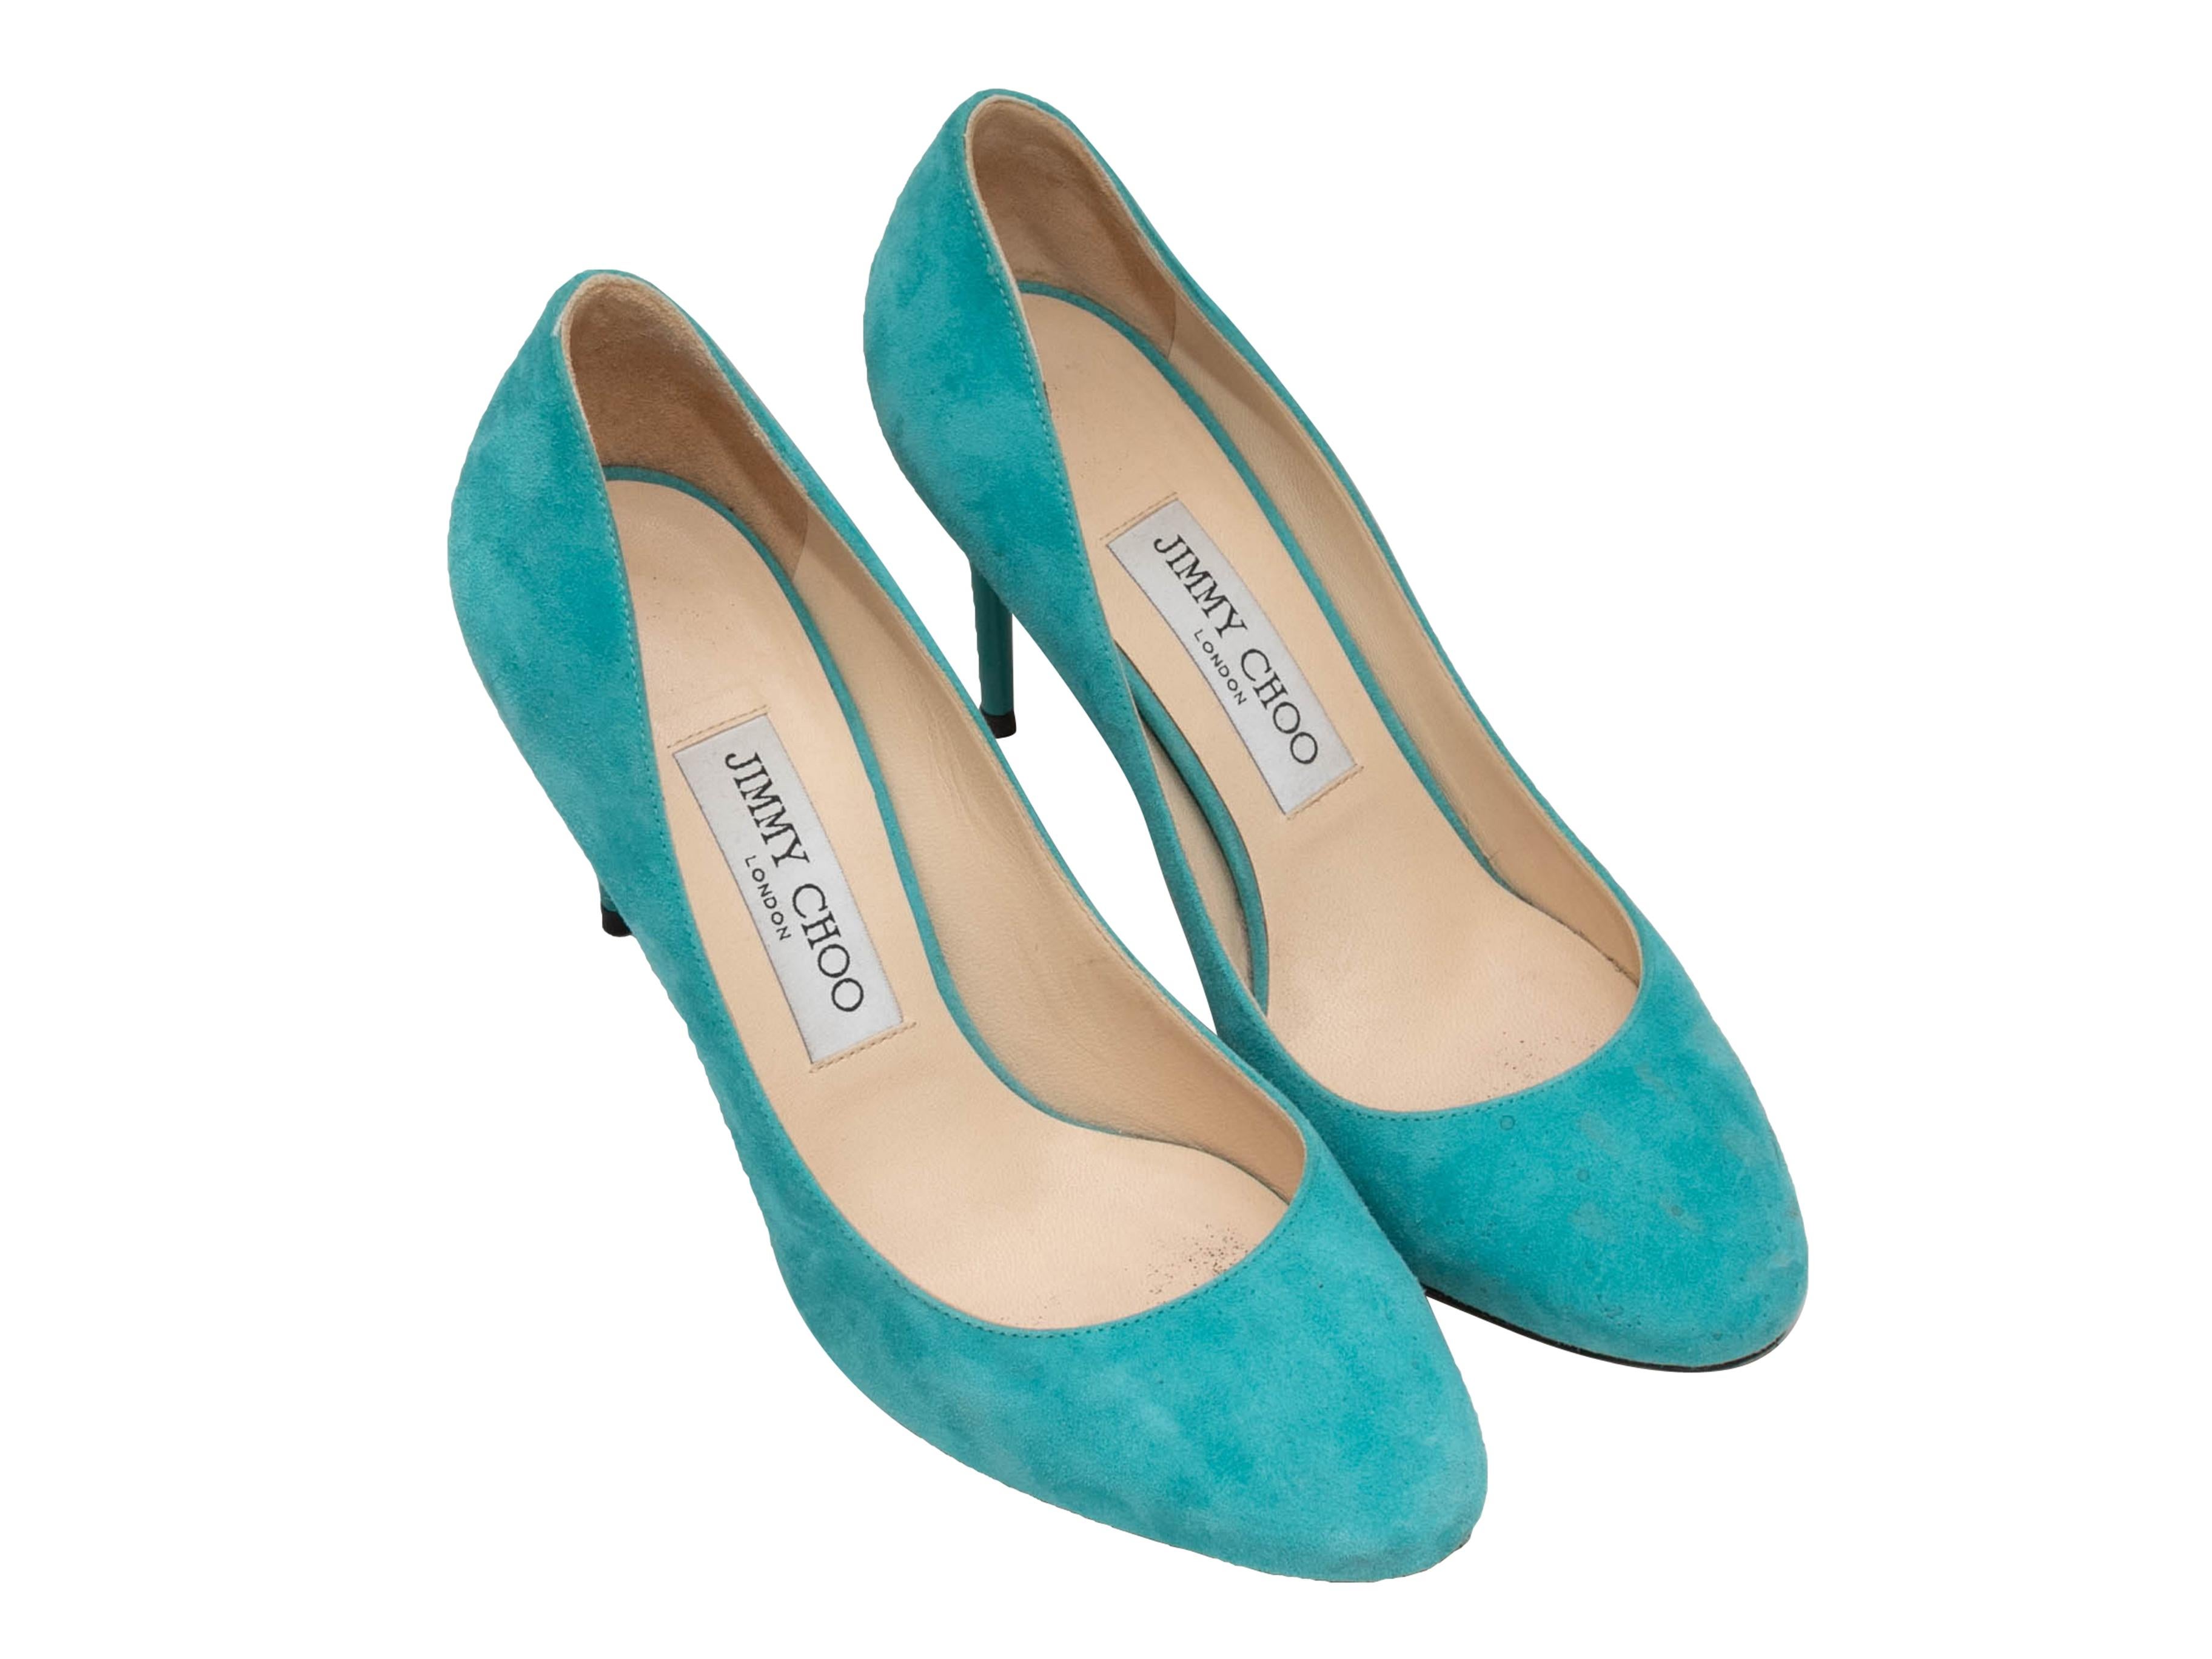 Turquoise Esme suede pumps by Jimmy Choo. 3.5